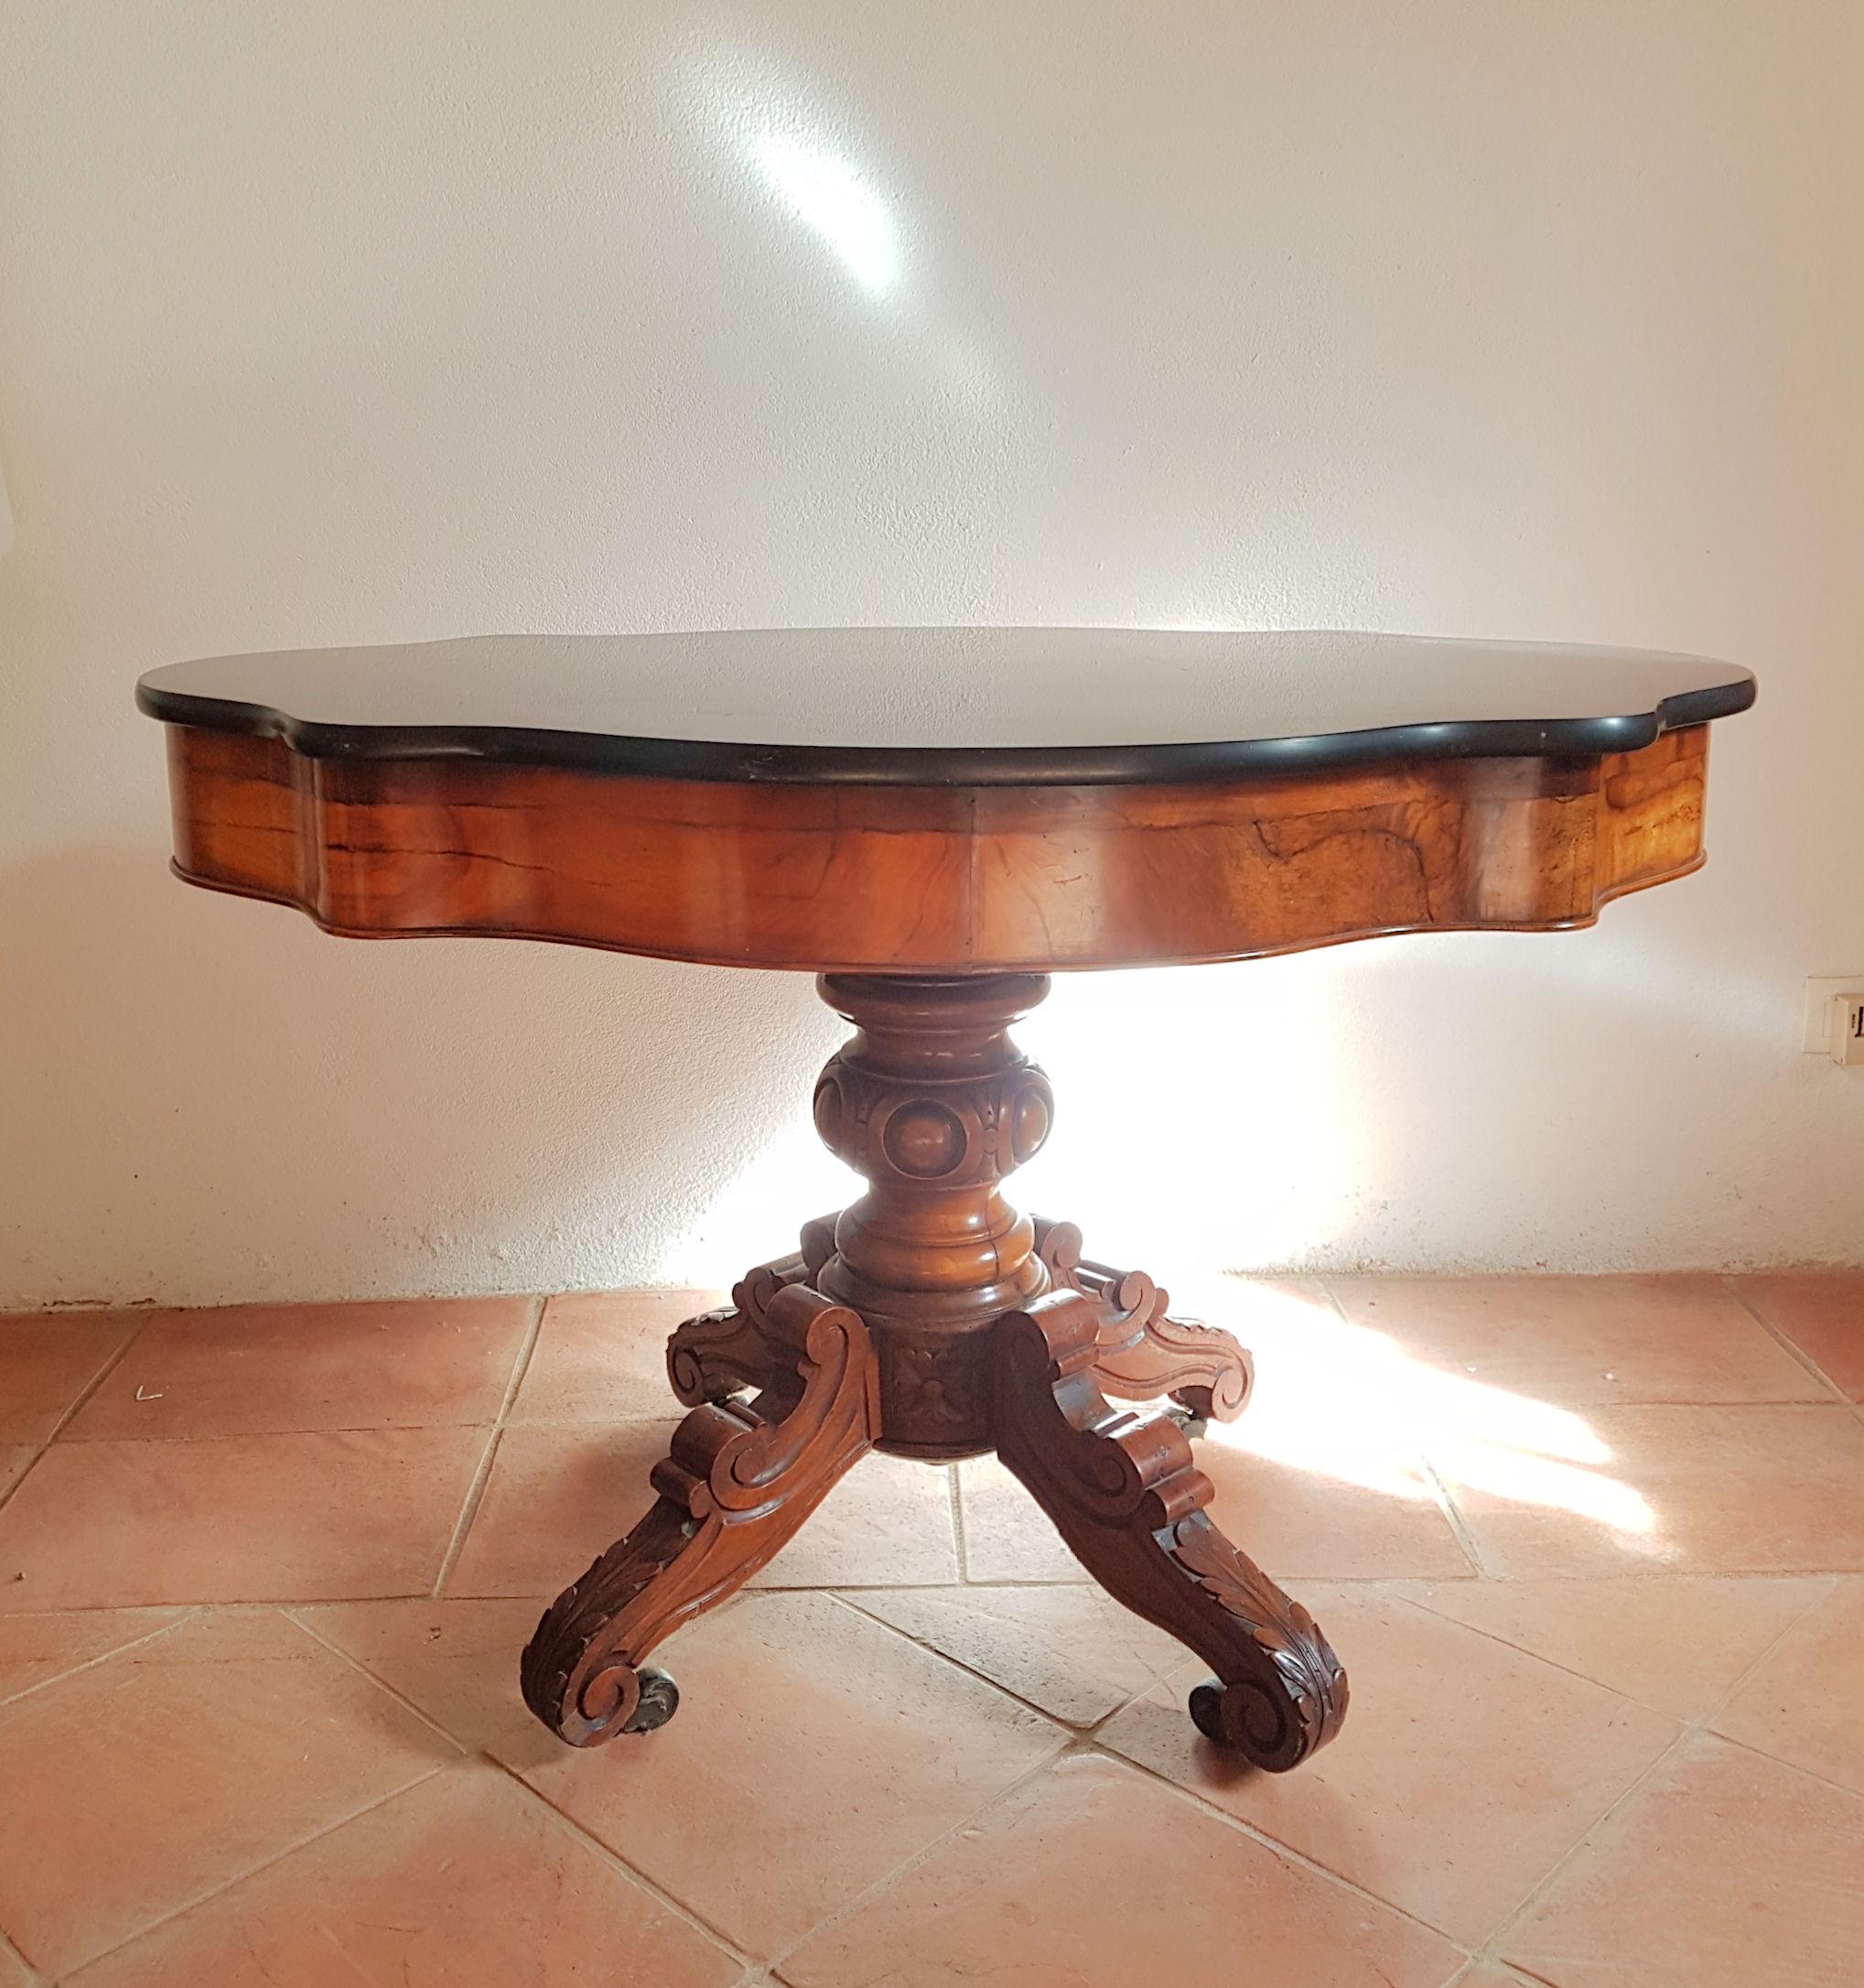 French 19th century table, in walnut wood and black marble top, 
with carved baluster column and scroll legs with pot castors.
Beautiful quality and condition for this French antique table.